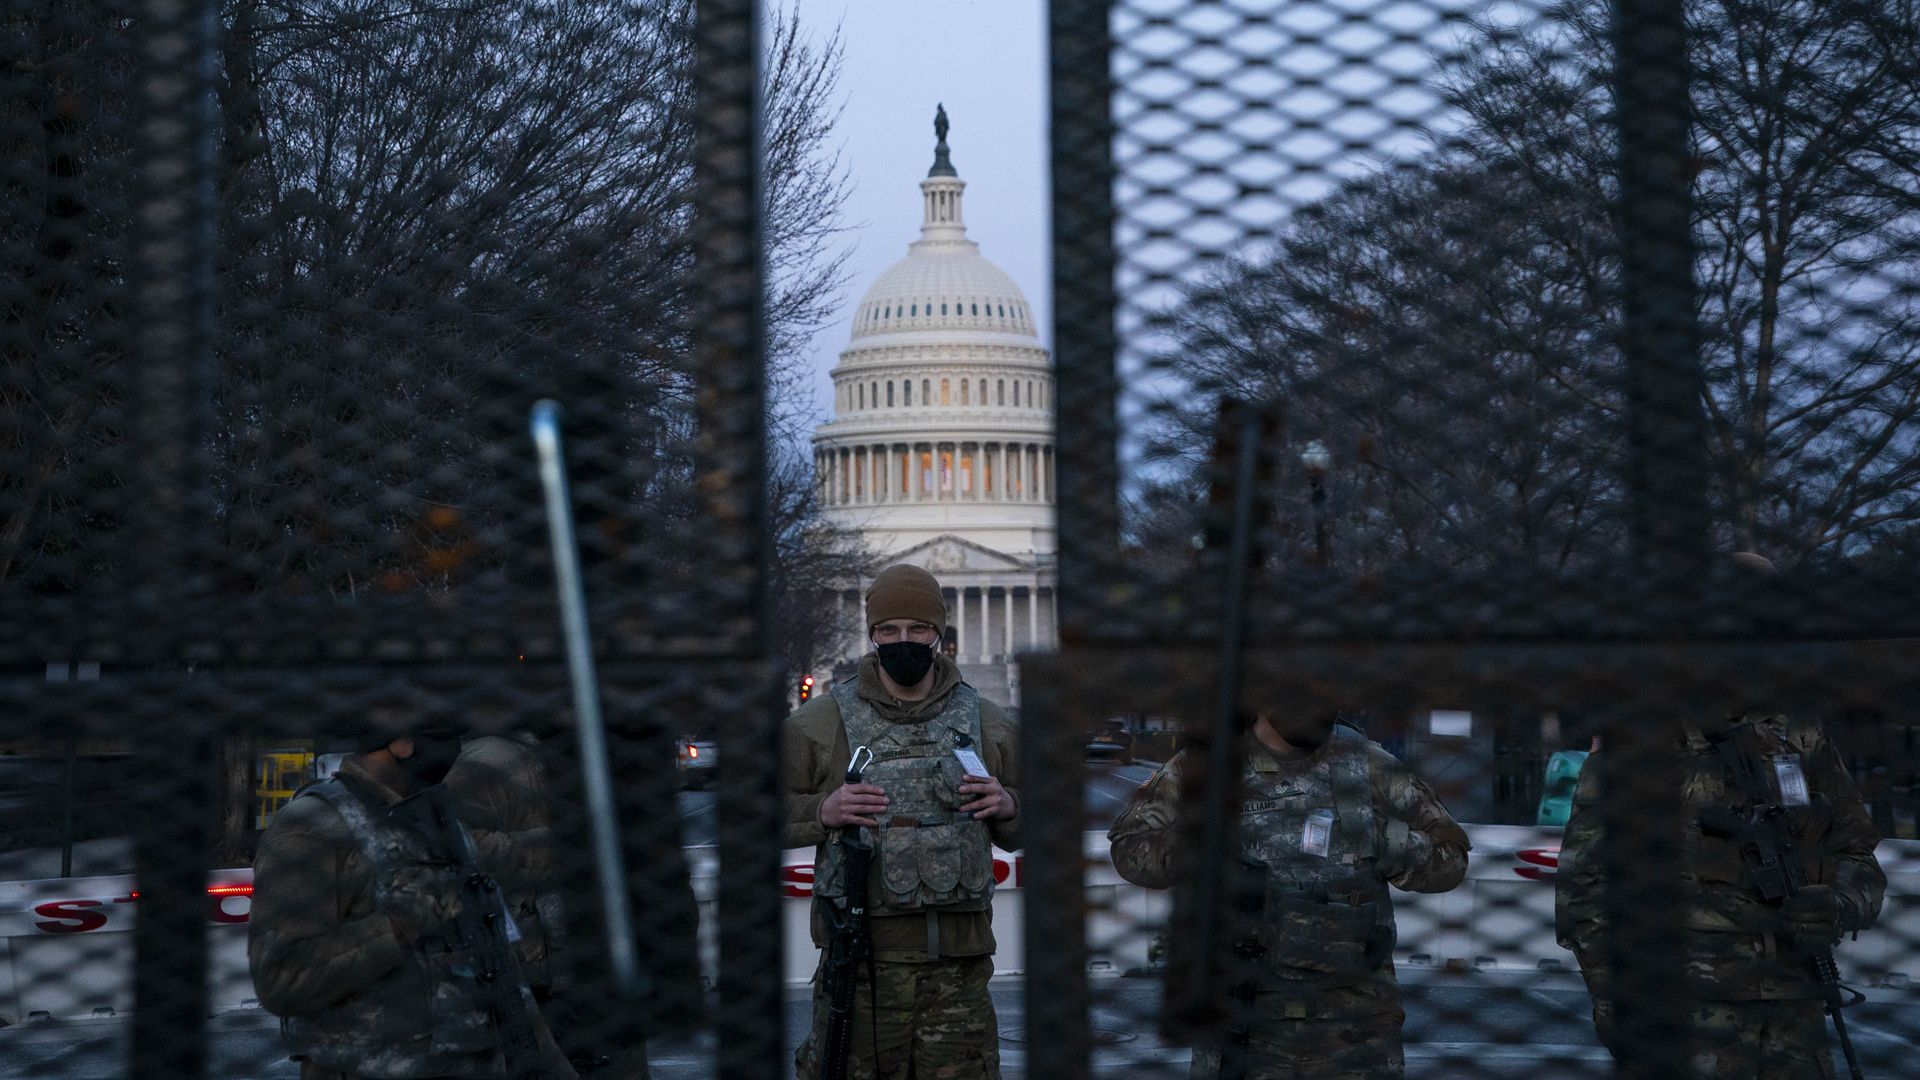 Members of the National Guard stand behind a barbed wire fence permitter surrounding the U.S. Capitol before sunrise on March 4, 2021 in Washington, DC.